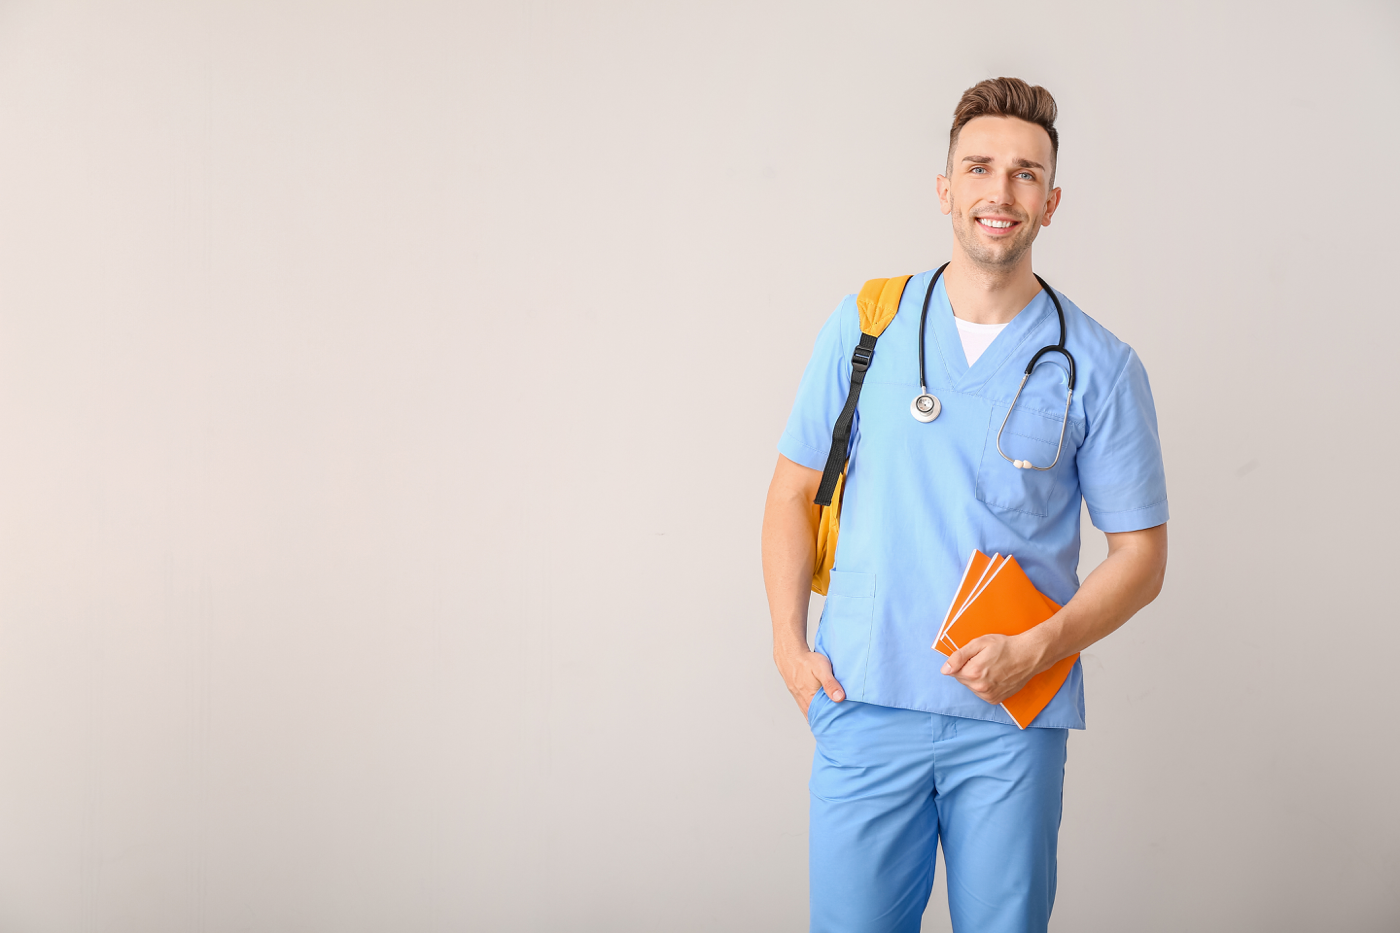 Nurse holds notebooks with backpack over his shoulder and stethoscope around neck